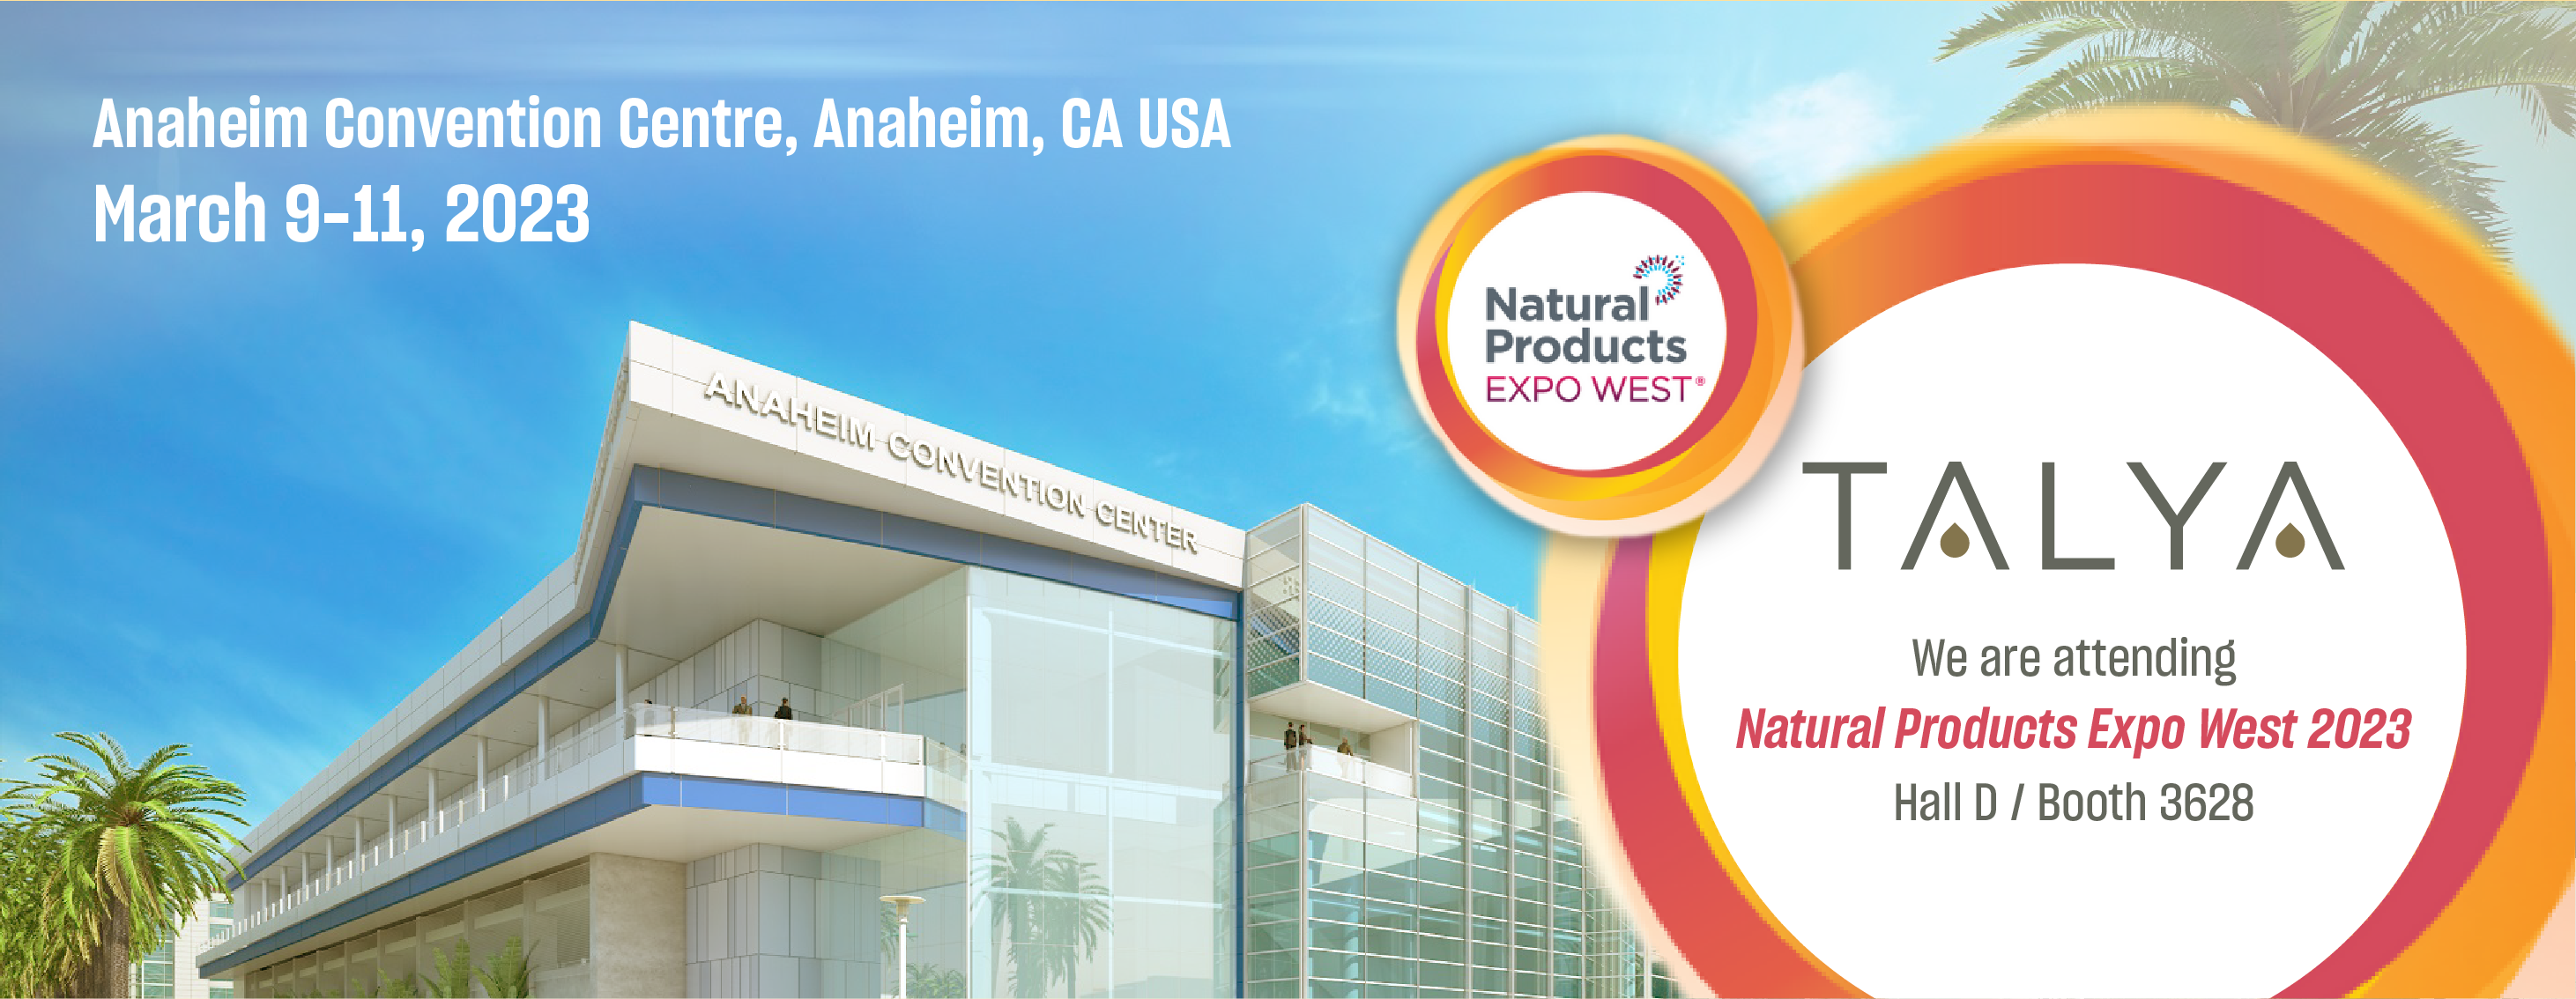 We are Attending Natural Products Expo West 2023